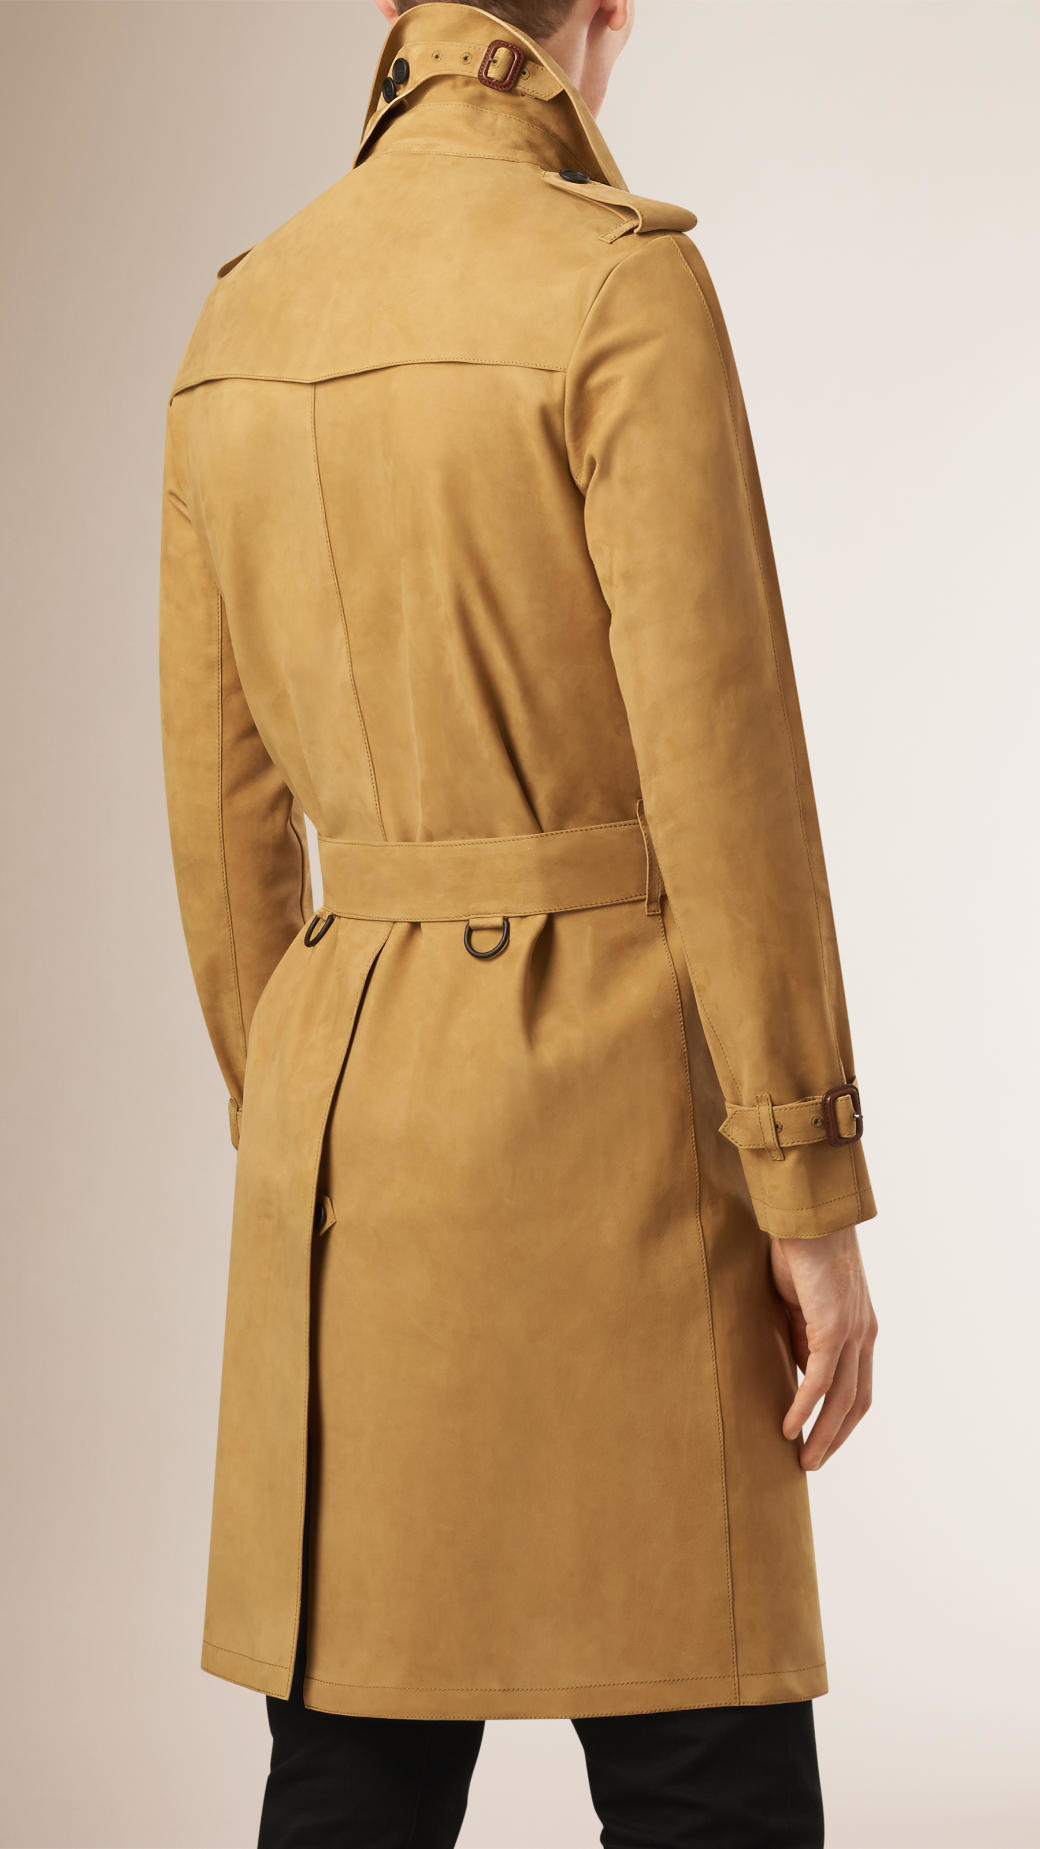 Lyst - Burberry Suede Trench Coat in Brown for Men